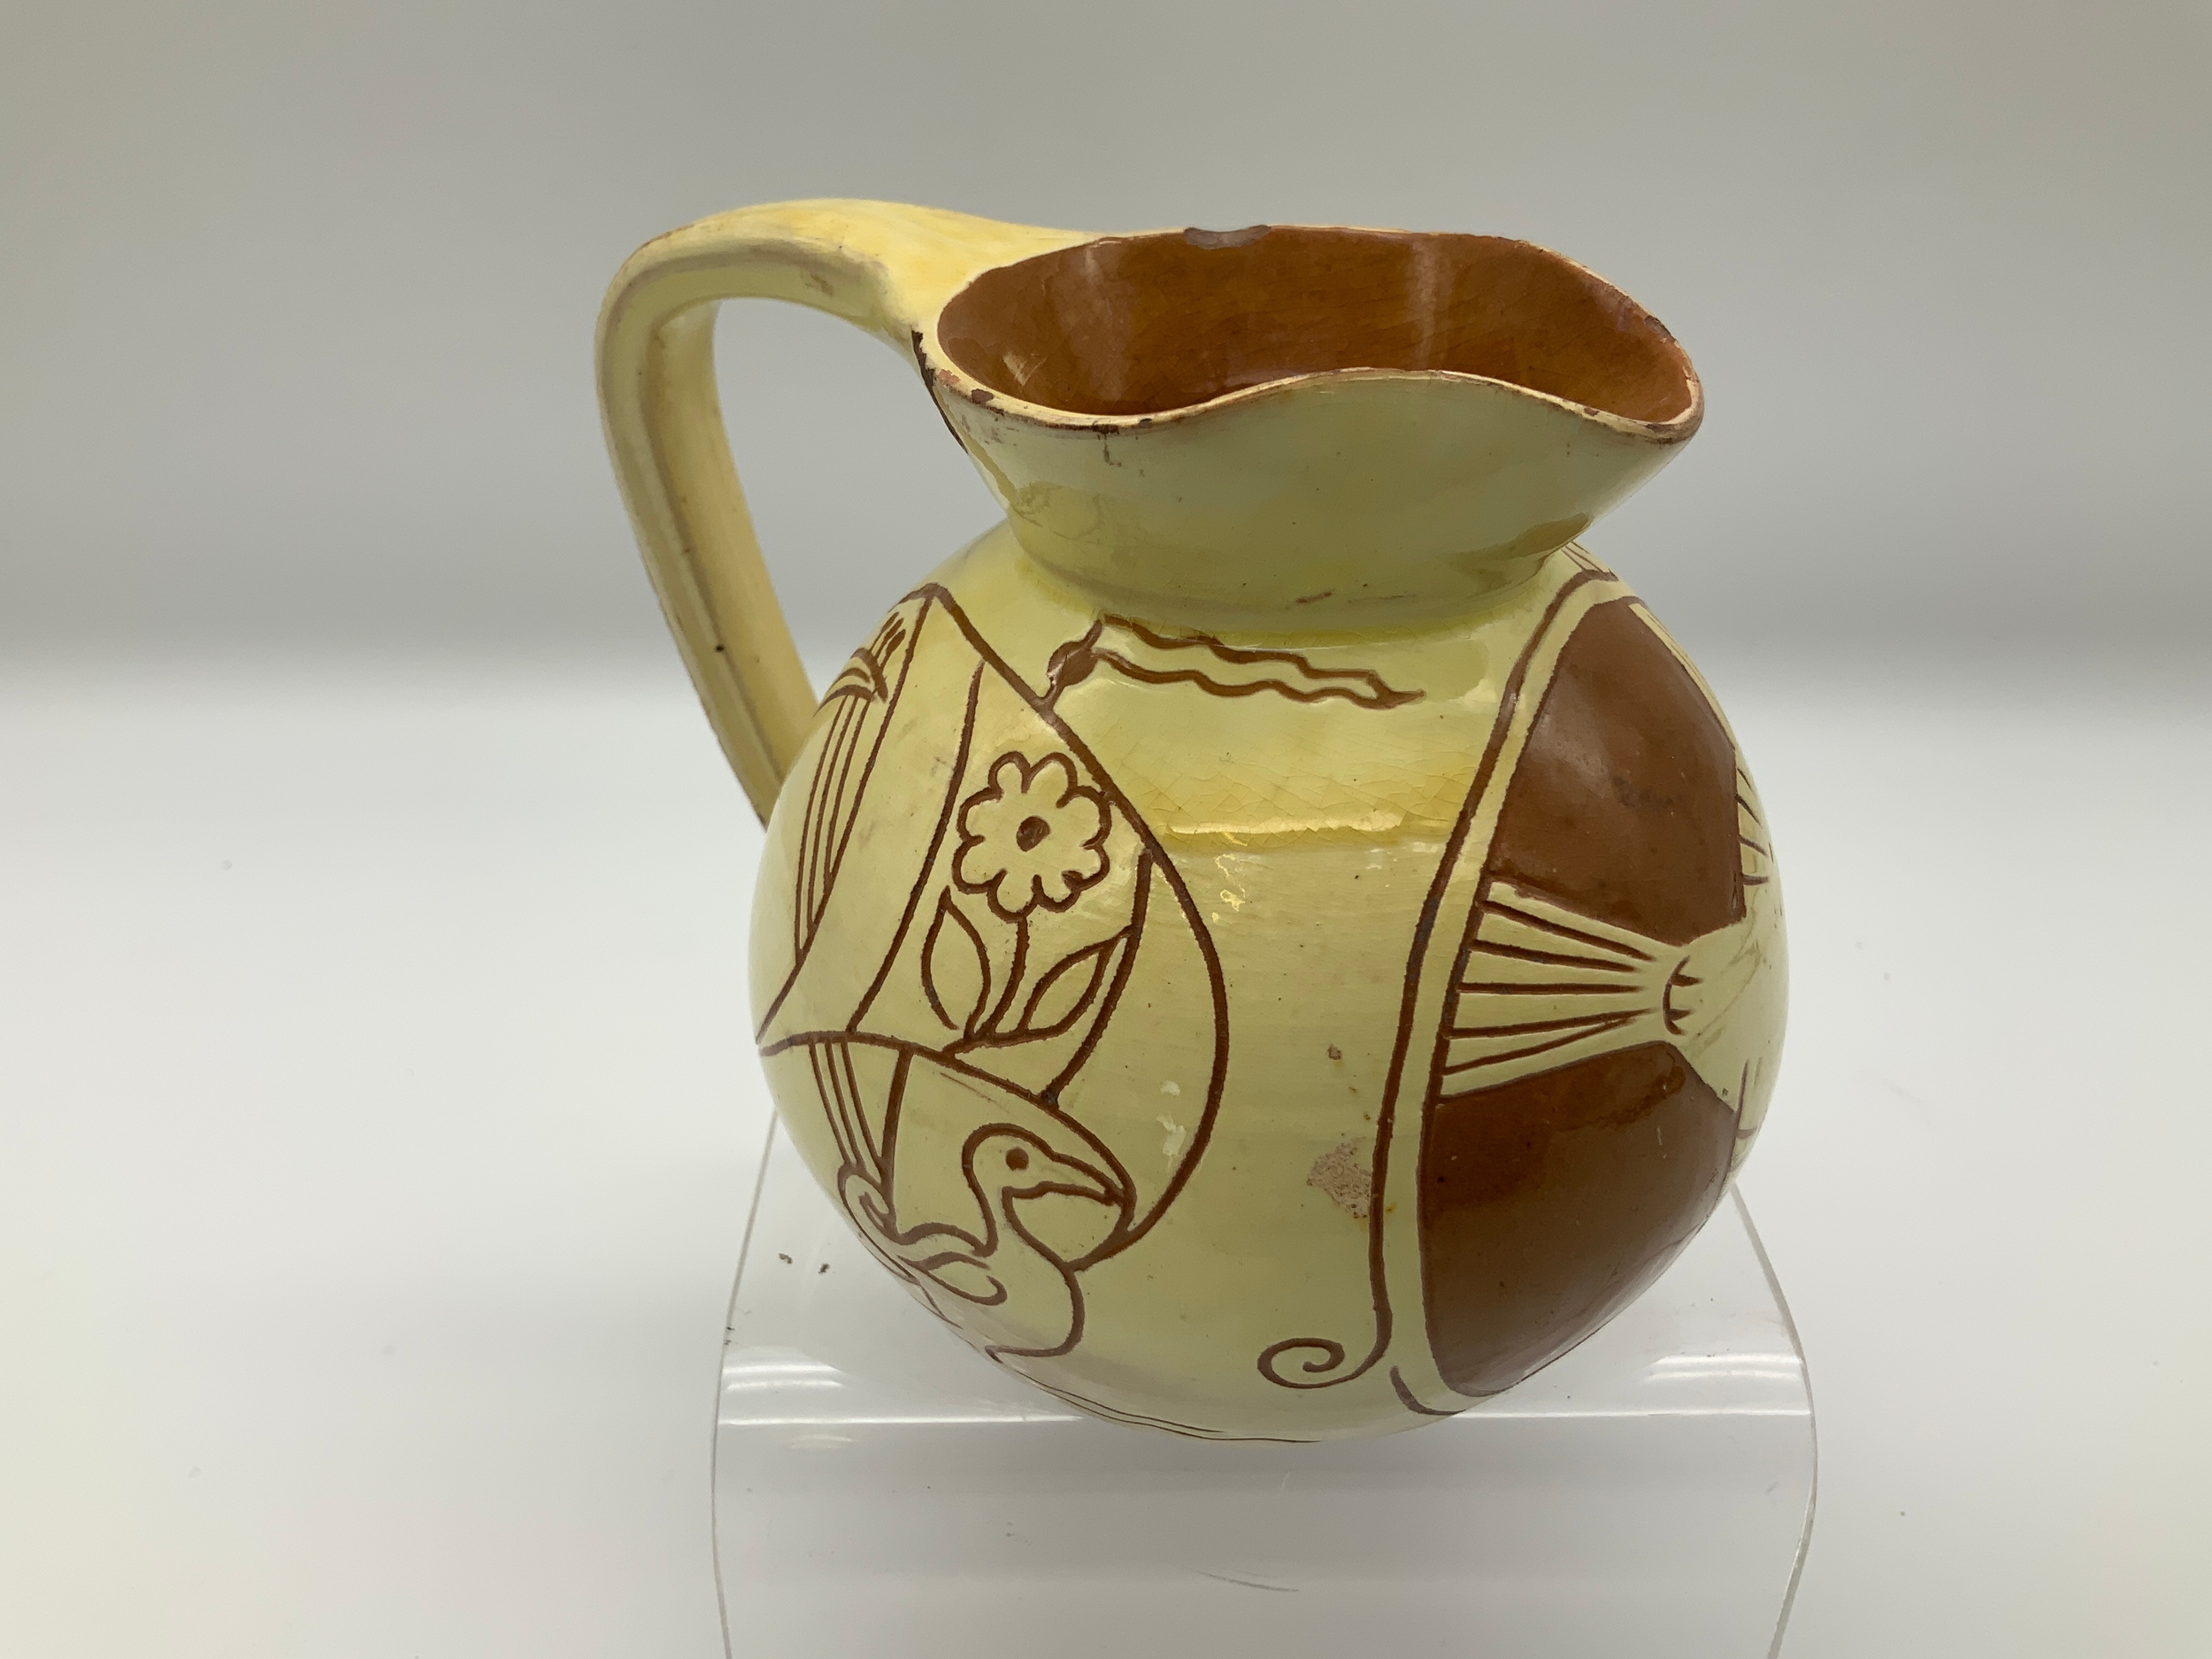 Barnstaple Art Pottery - Brannam Jug - One of the First Year of Firing - Signed CHB - Sept 16/79 - Image 2 of 3